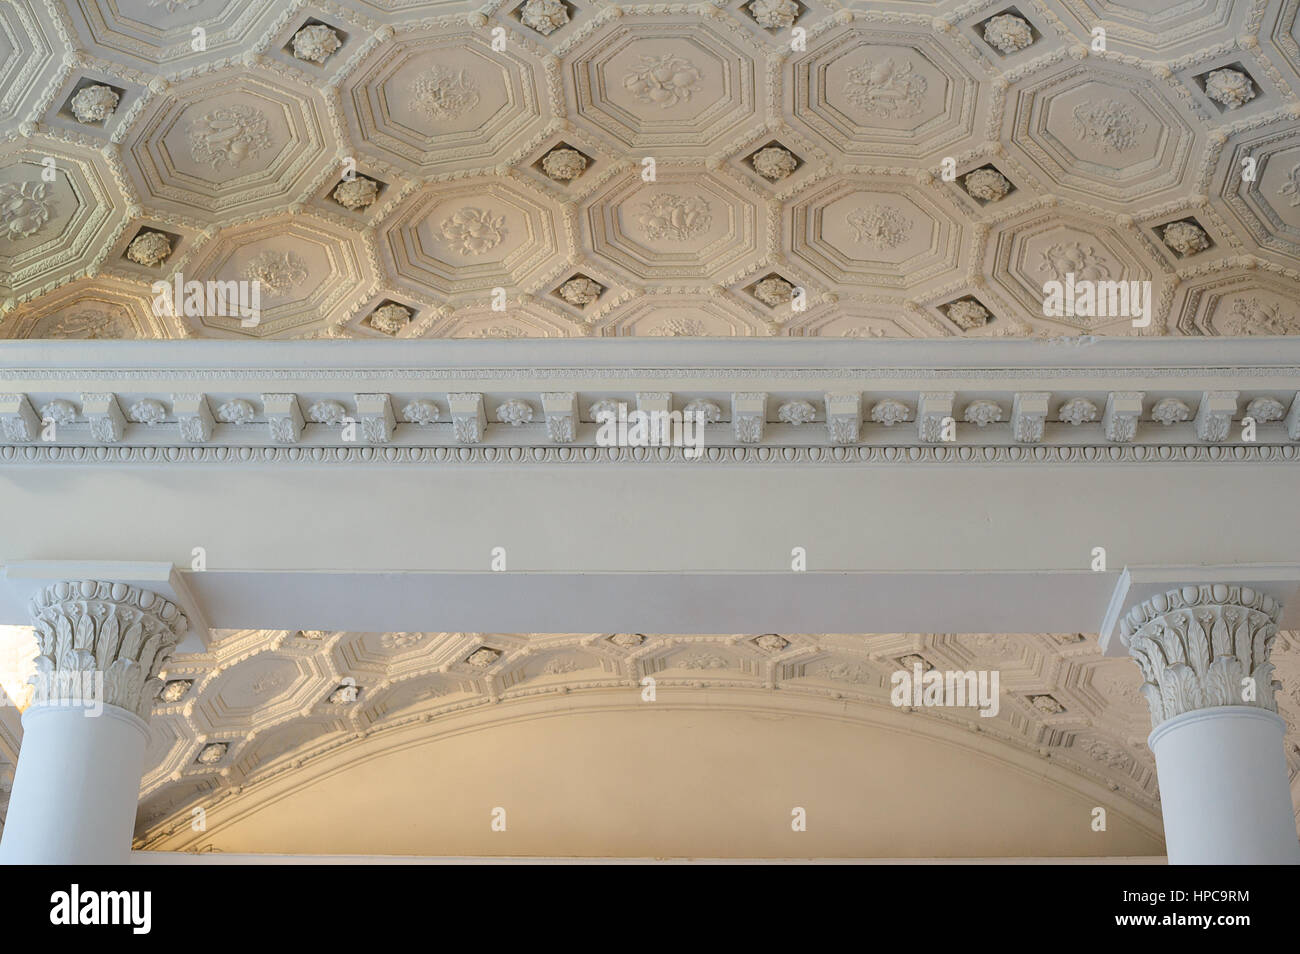 patterns on a white ceiling molding indoors Stock Photo